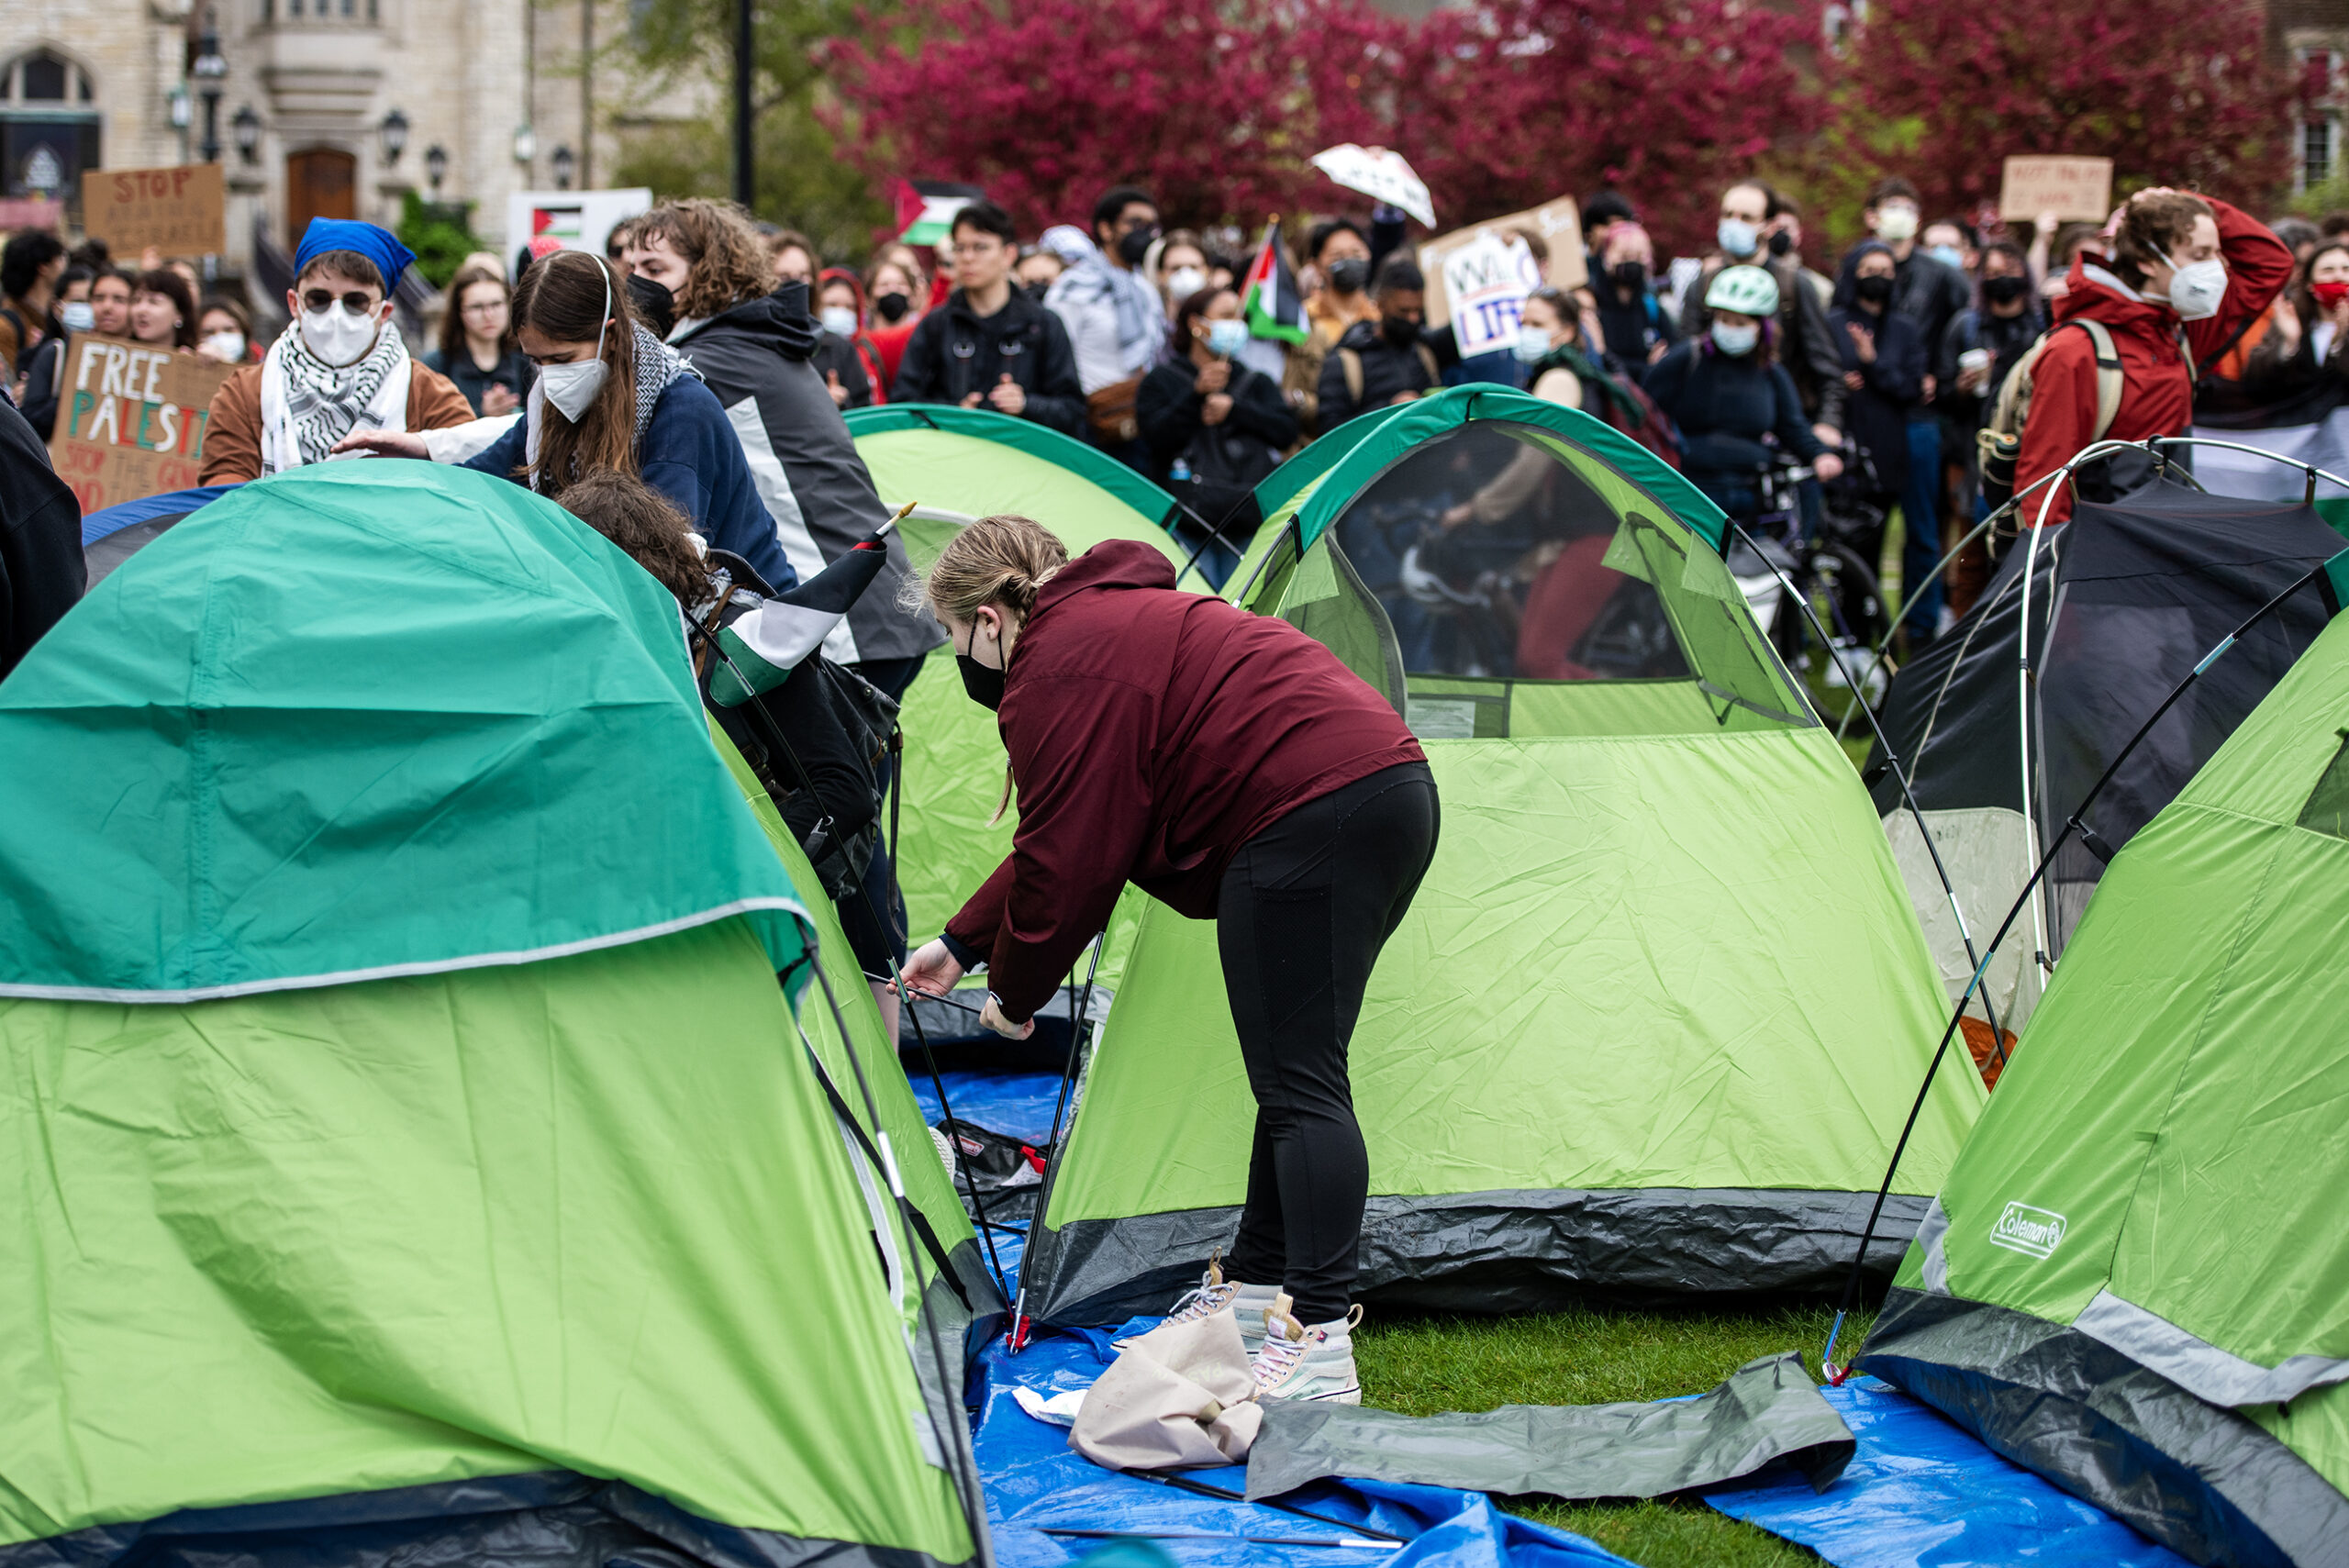 Green tents are pitched in the crowd of protesters.